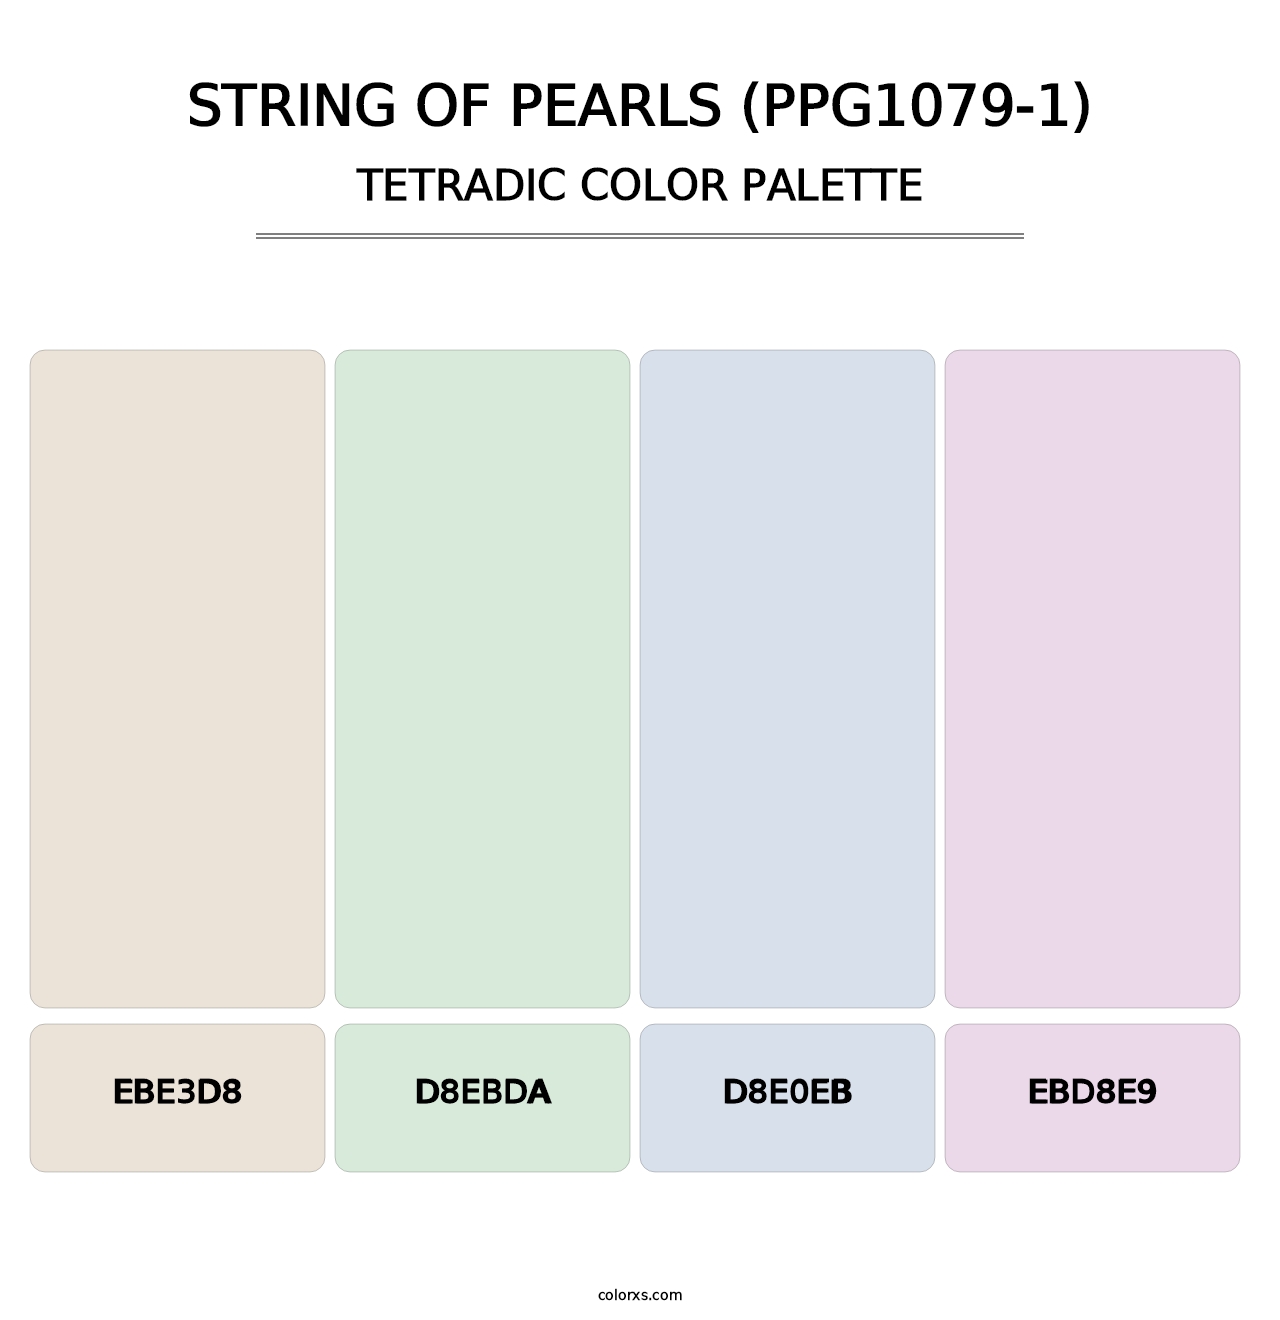 String Of Pearls (PPG1079-1) - Tetradic Color Palette